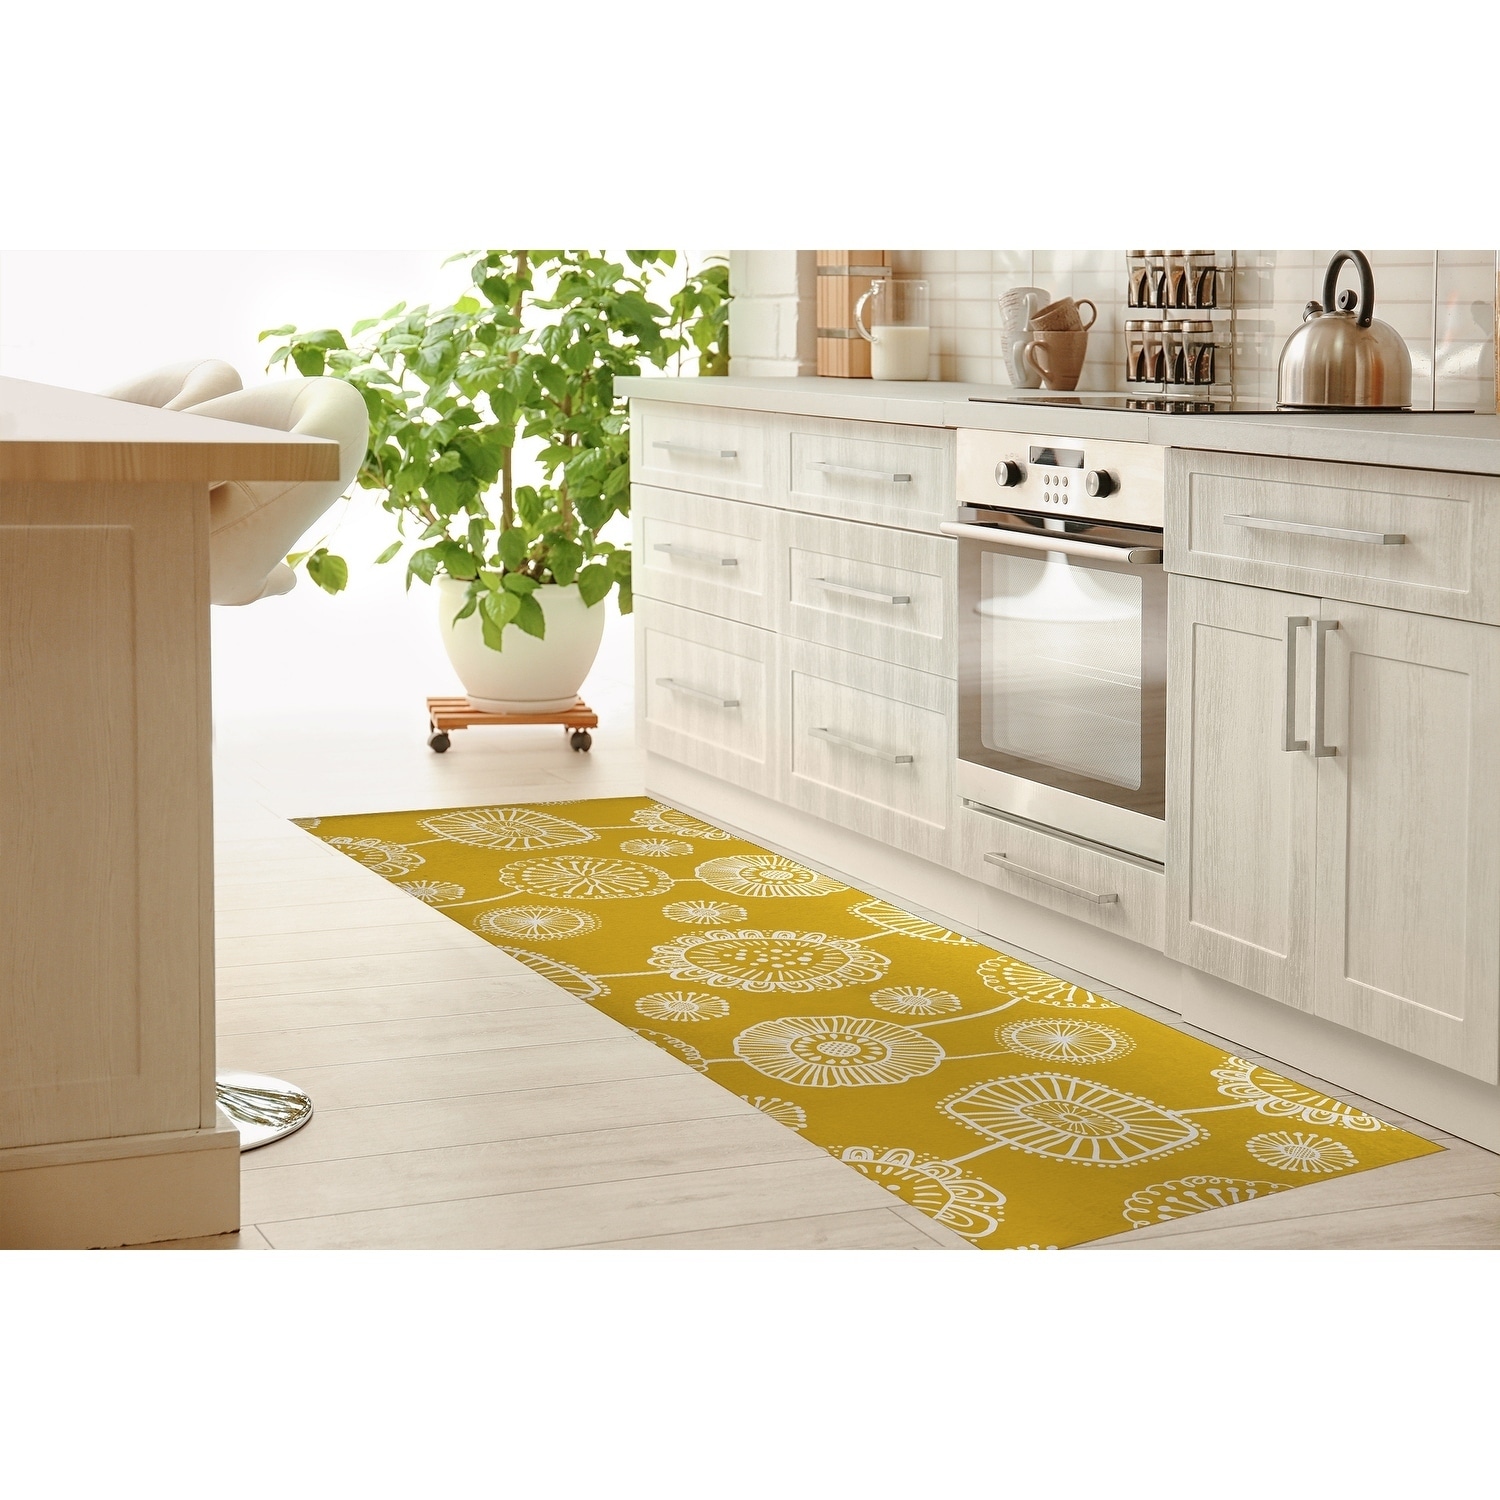 Shop Doodle Floral Yellow Kitchen Mat By Kavka Designs Overstock 30585927